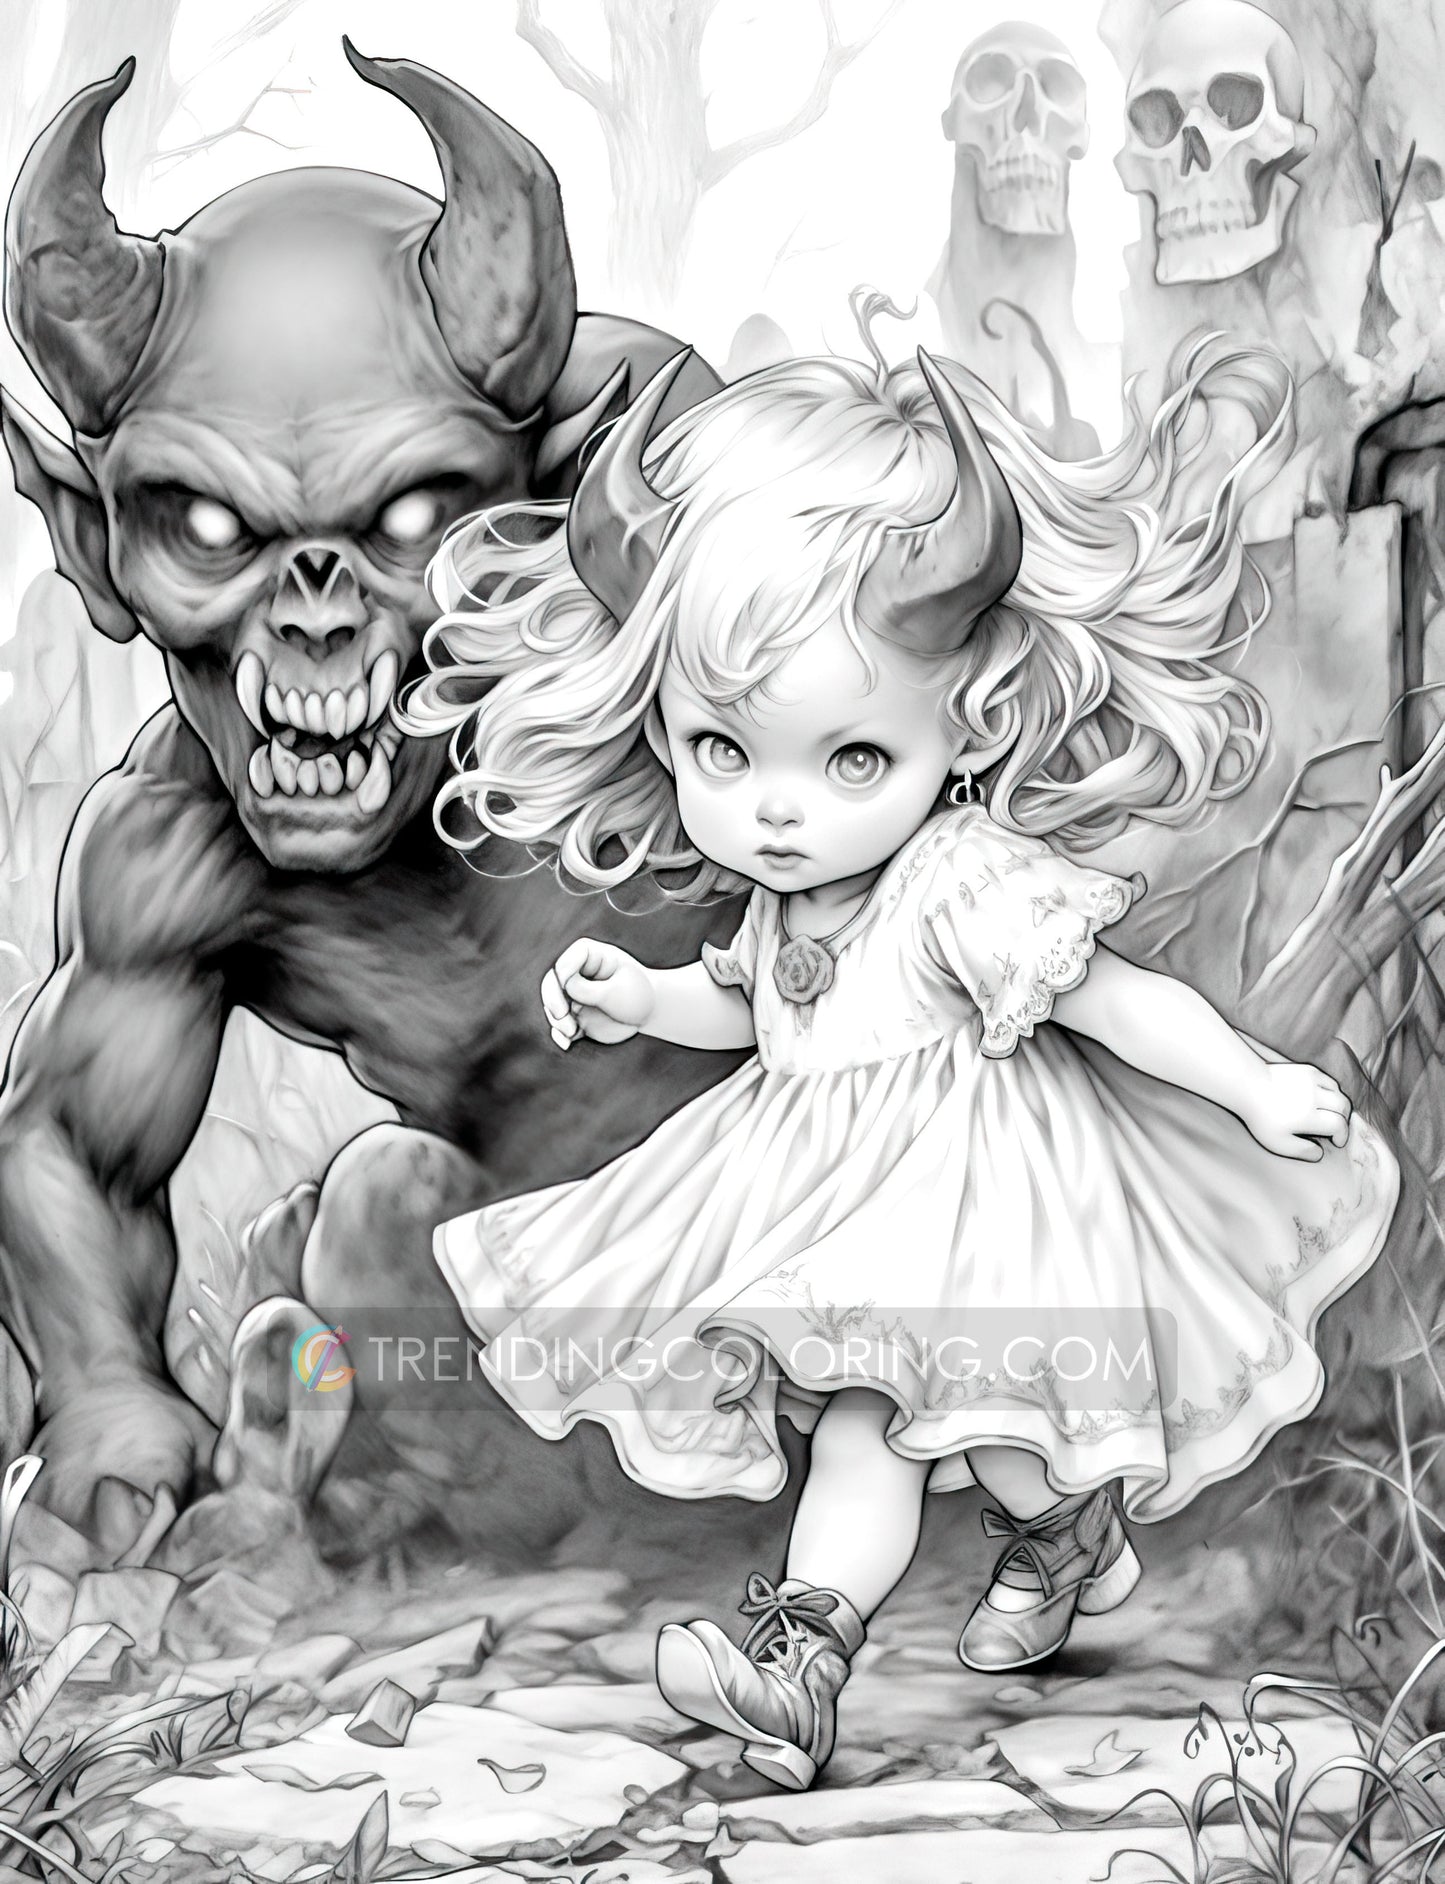 25 Little Devil Girls Grayscale Coloring Pages - Halloween Coloring - Instant Download - Printable Dark/Light